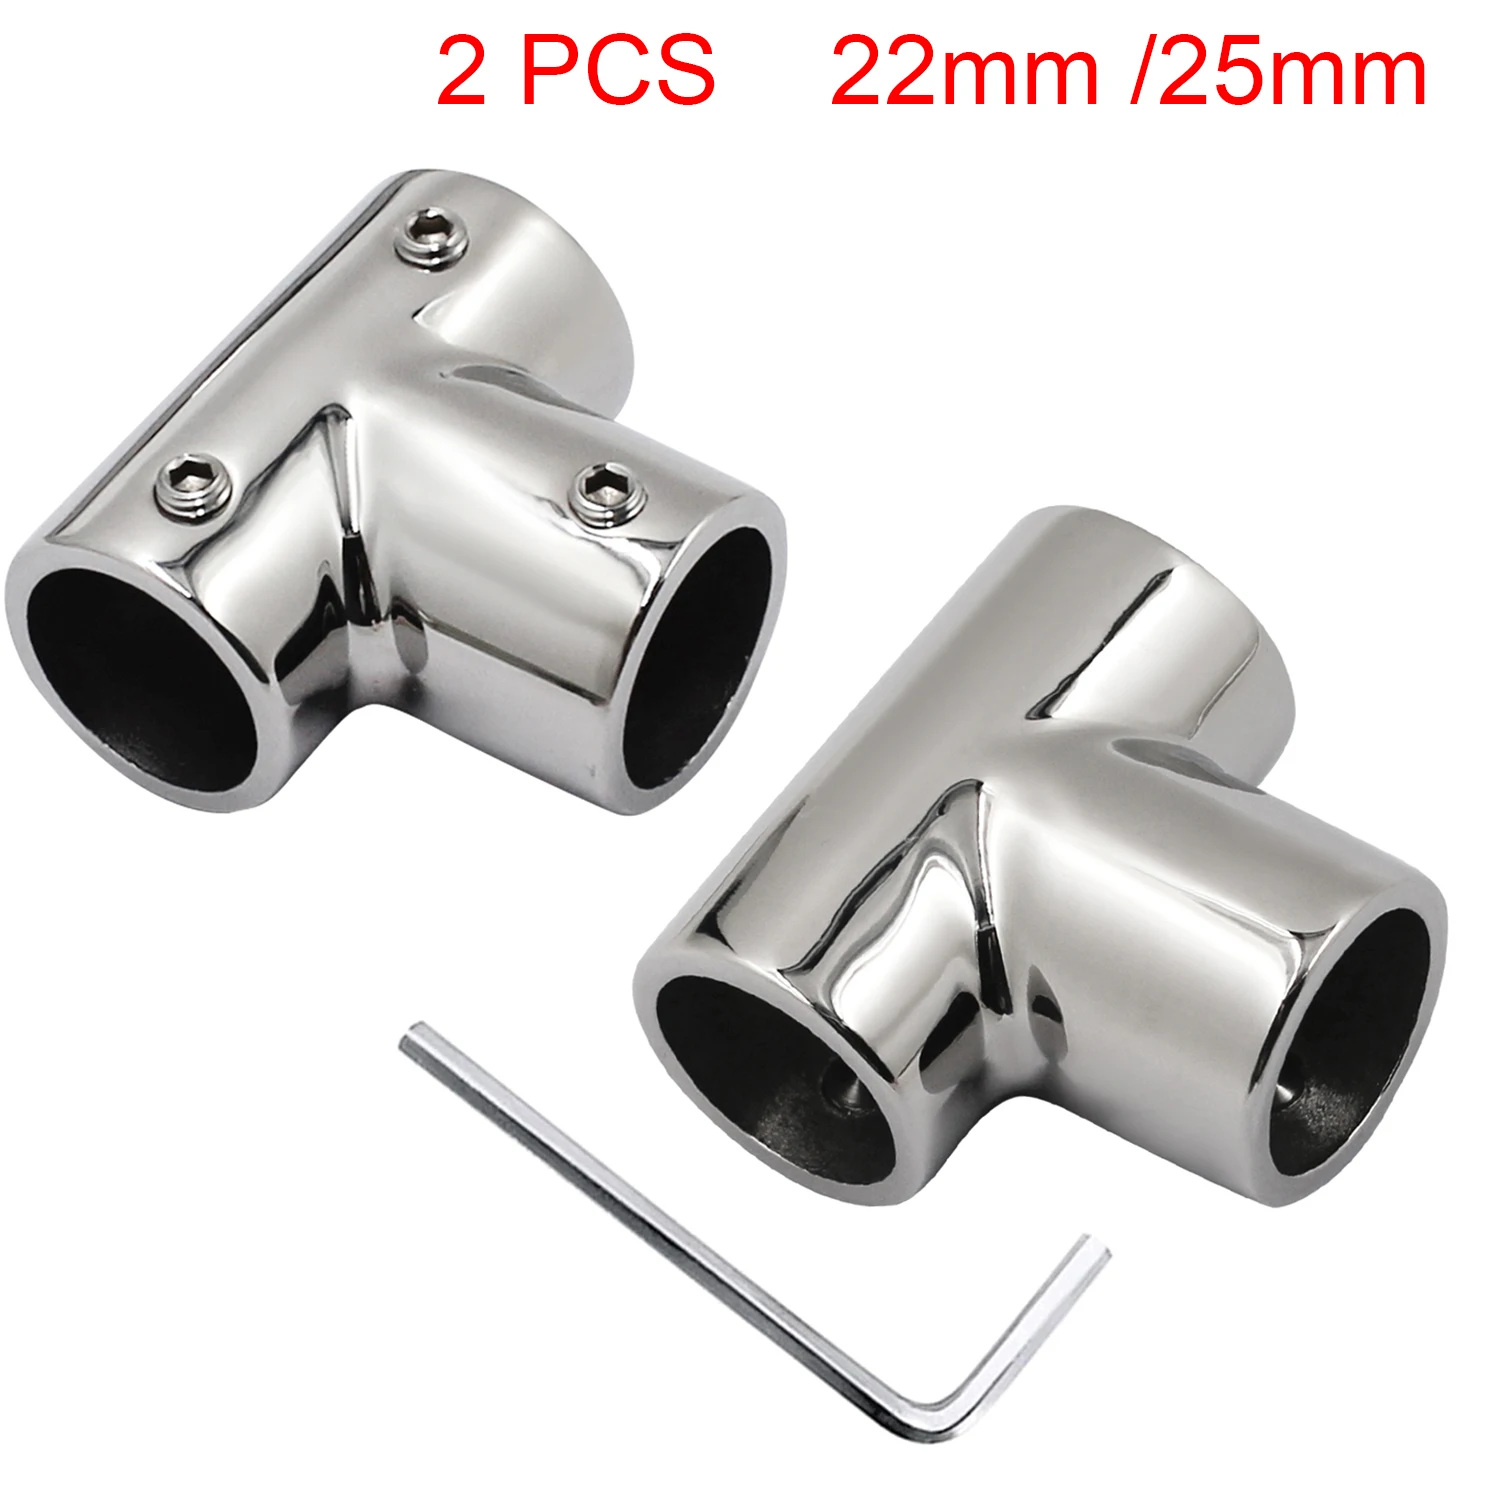 2 Pcs Stainless Steel 316 Marine Boat 3 Way Handrail Fitting 90° Deck Hand Rail Tee Joint Connector for 22mm/25mm Tube/Pipe heavy duty marine grade 316 stainless steel boats yacht hand rail fitting 90 degree elbow for 25mm 1 pipe tubing mount hardware